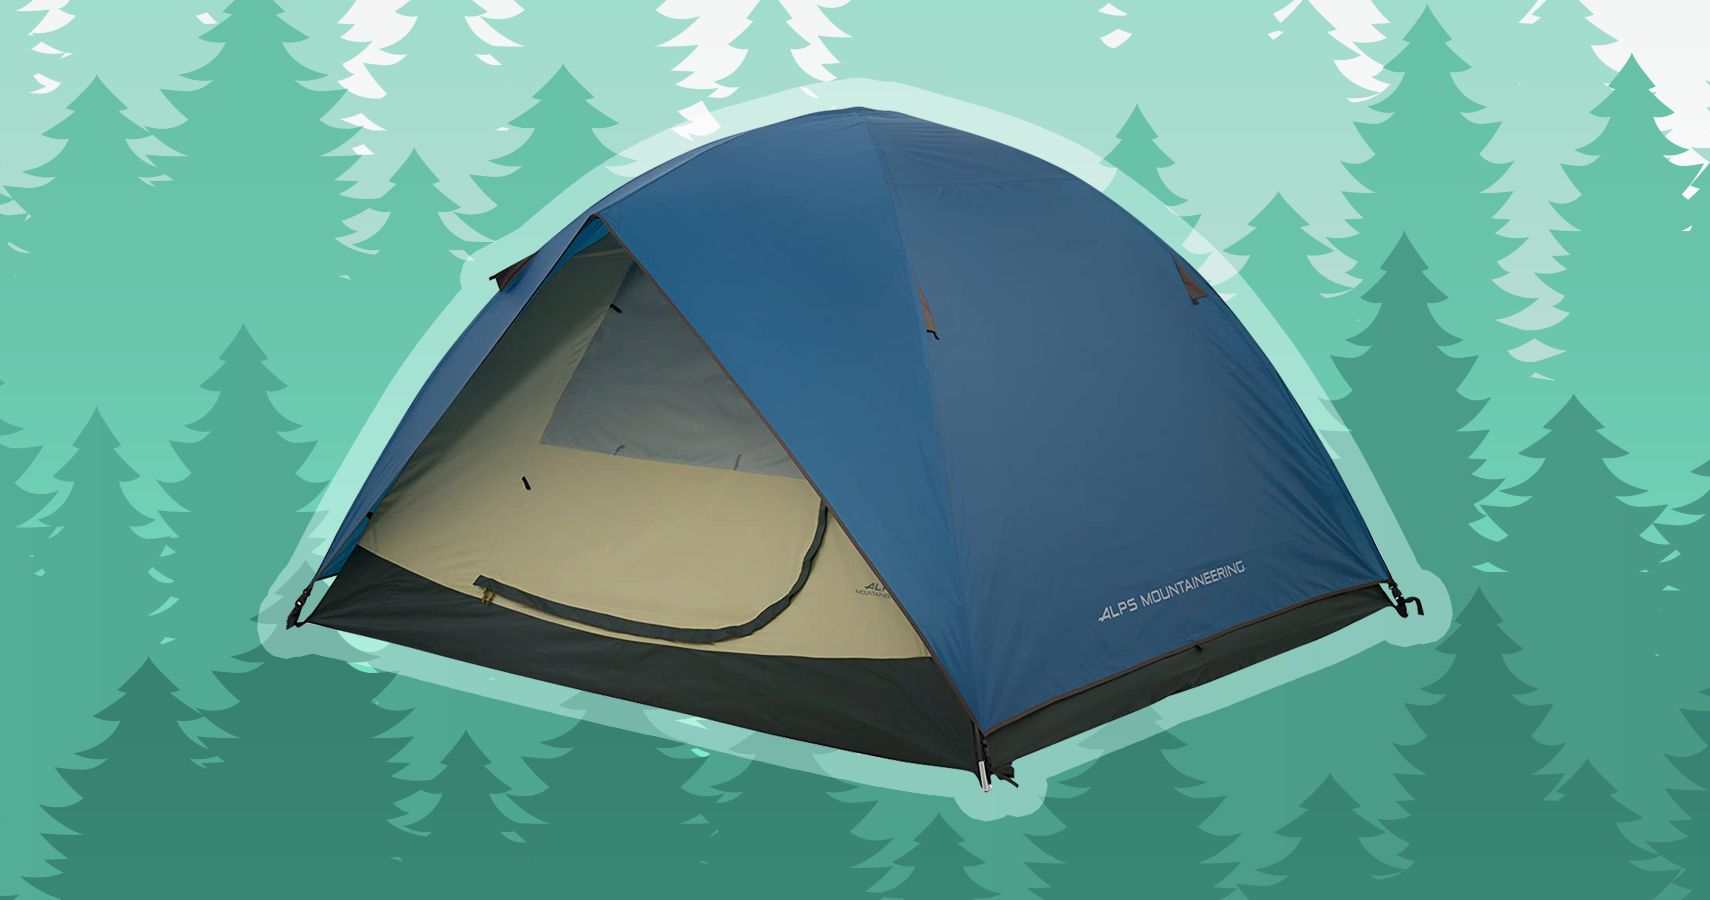 10 Camping Tents for a Family Of 5